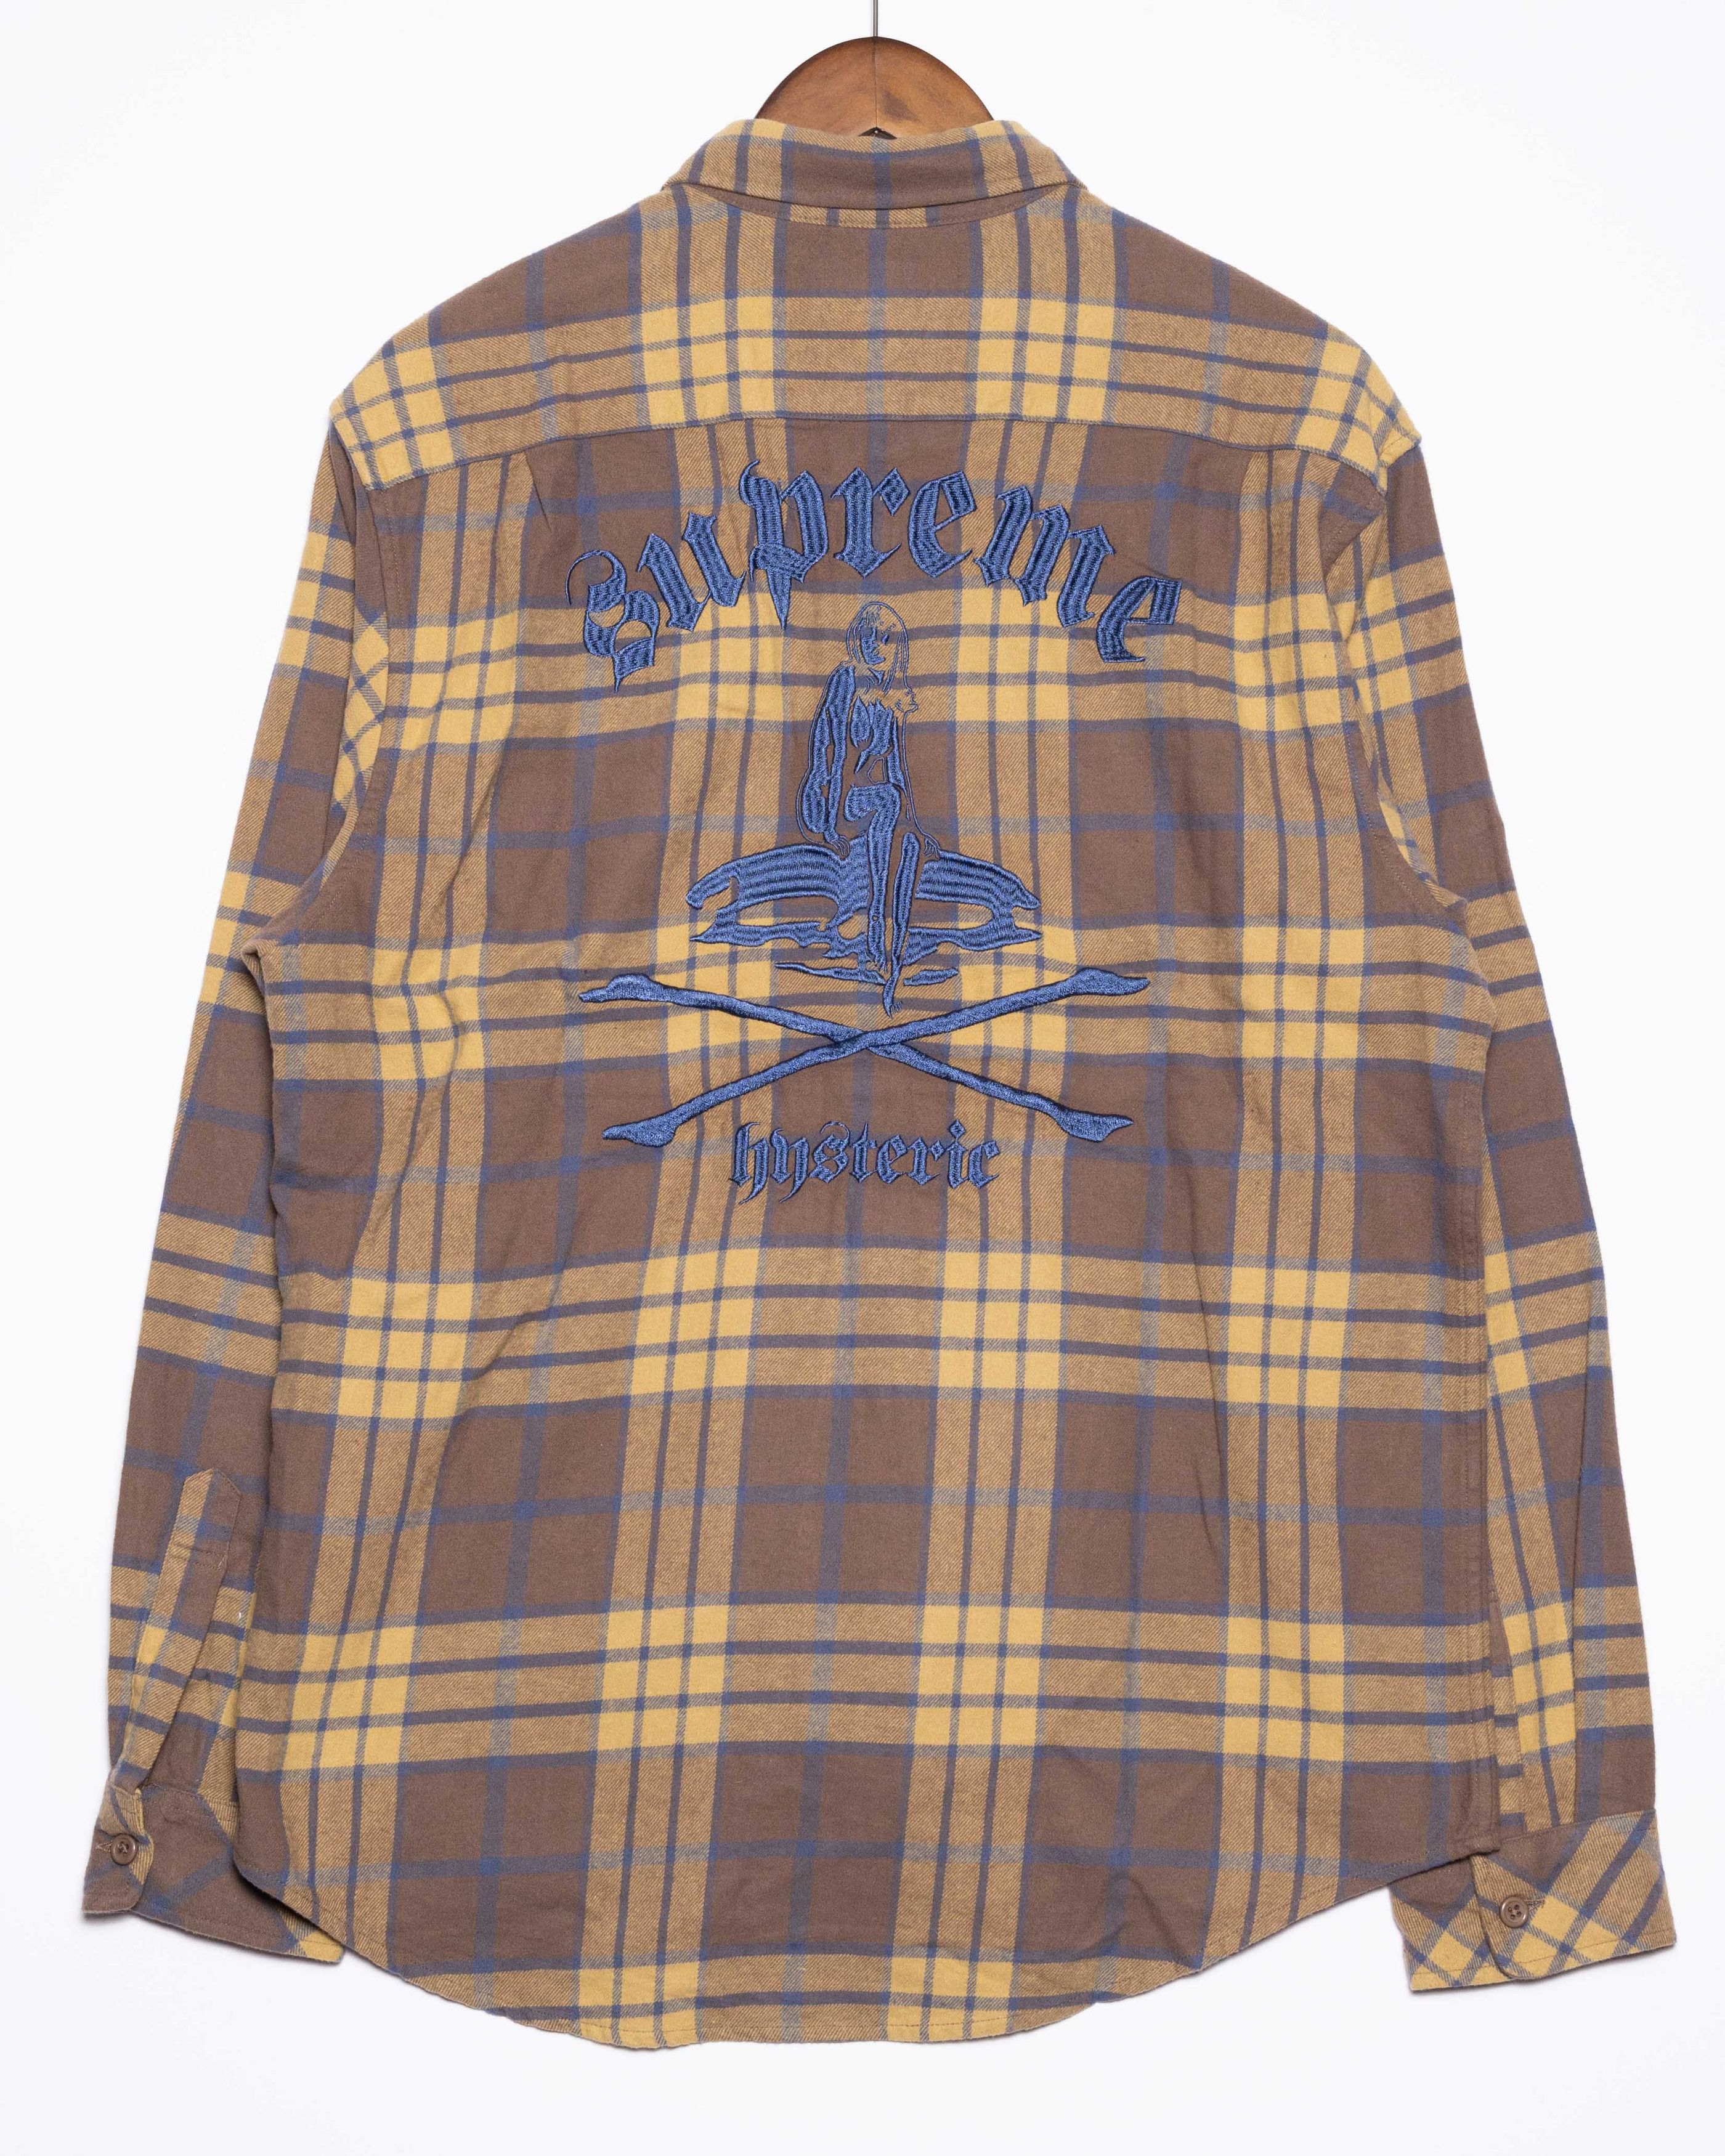 Supreme Supreme x Hysteric Glamour Flannel New with tags | Grailed